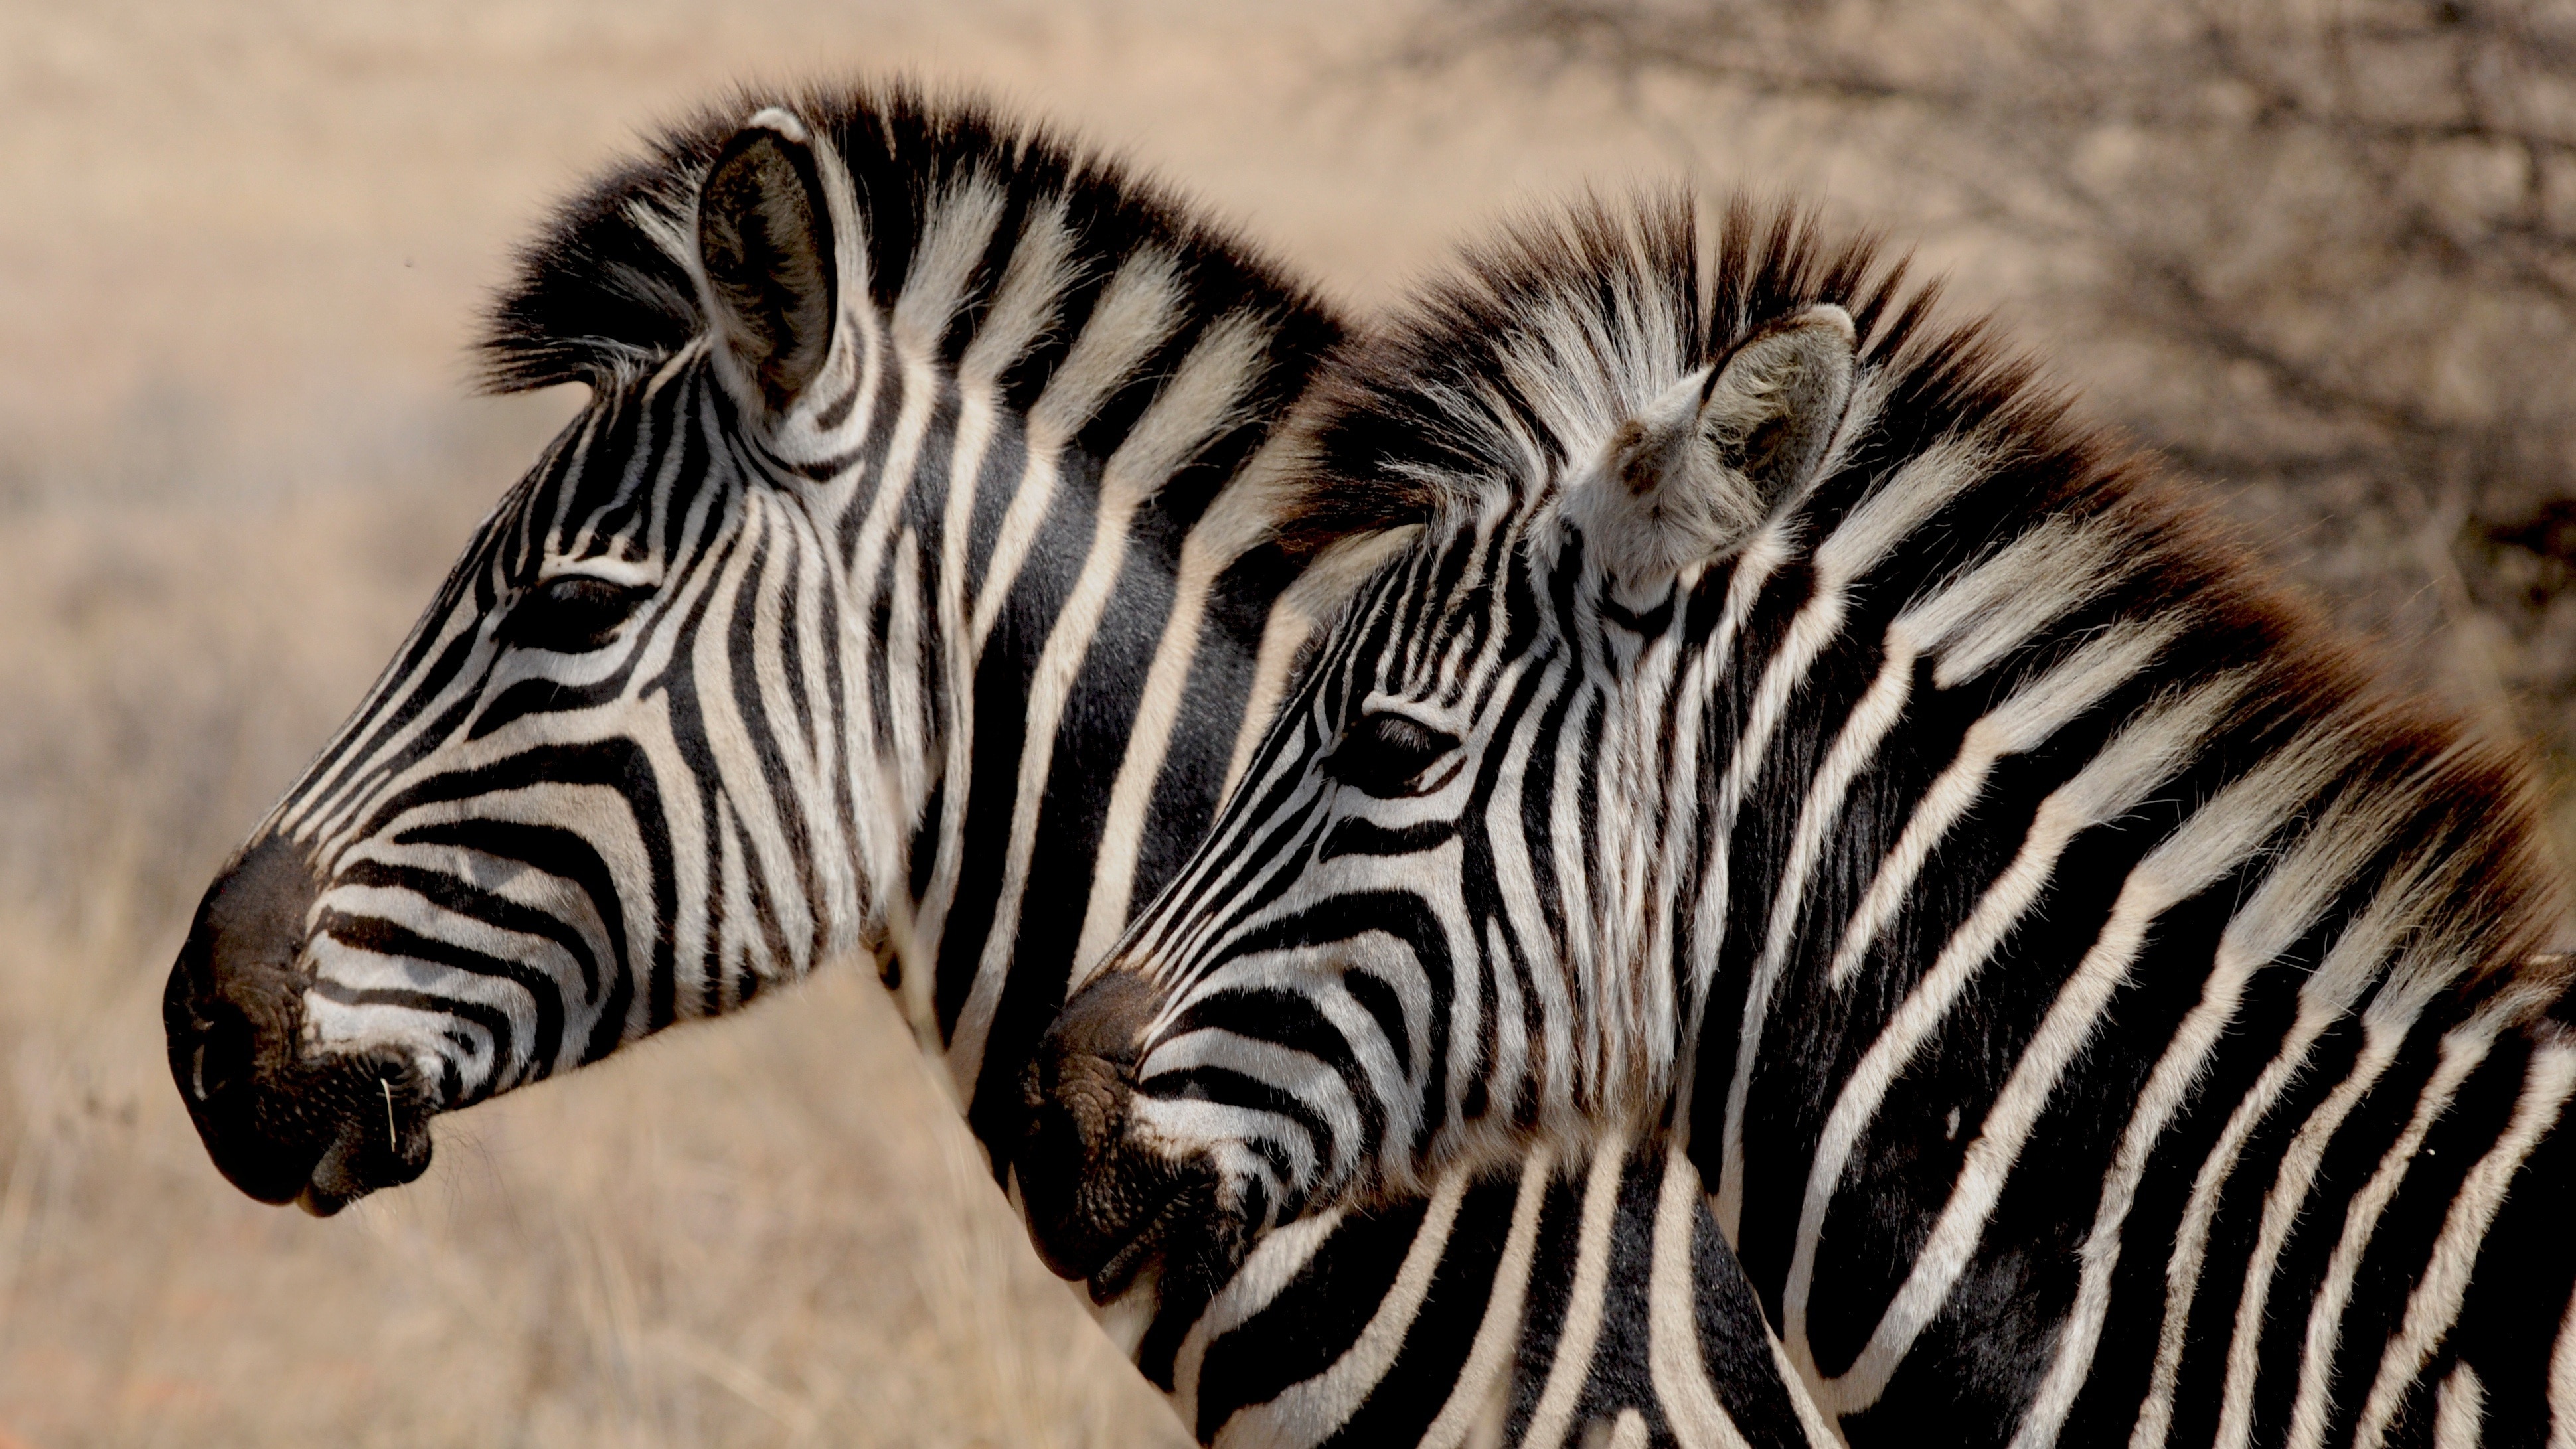 two zebras standing together during daytime